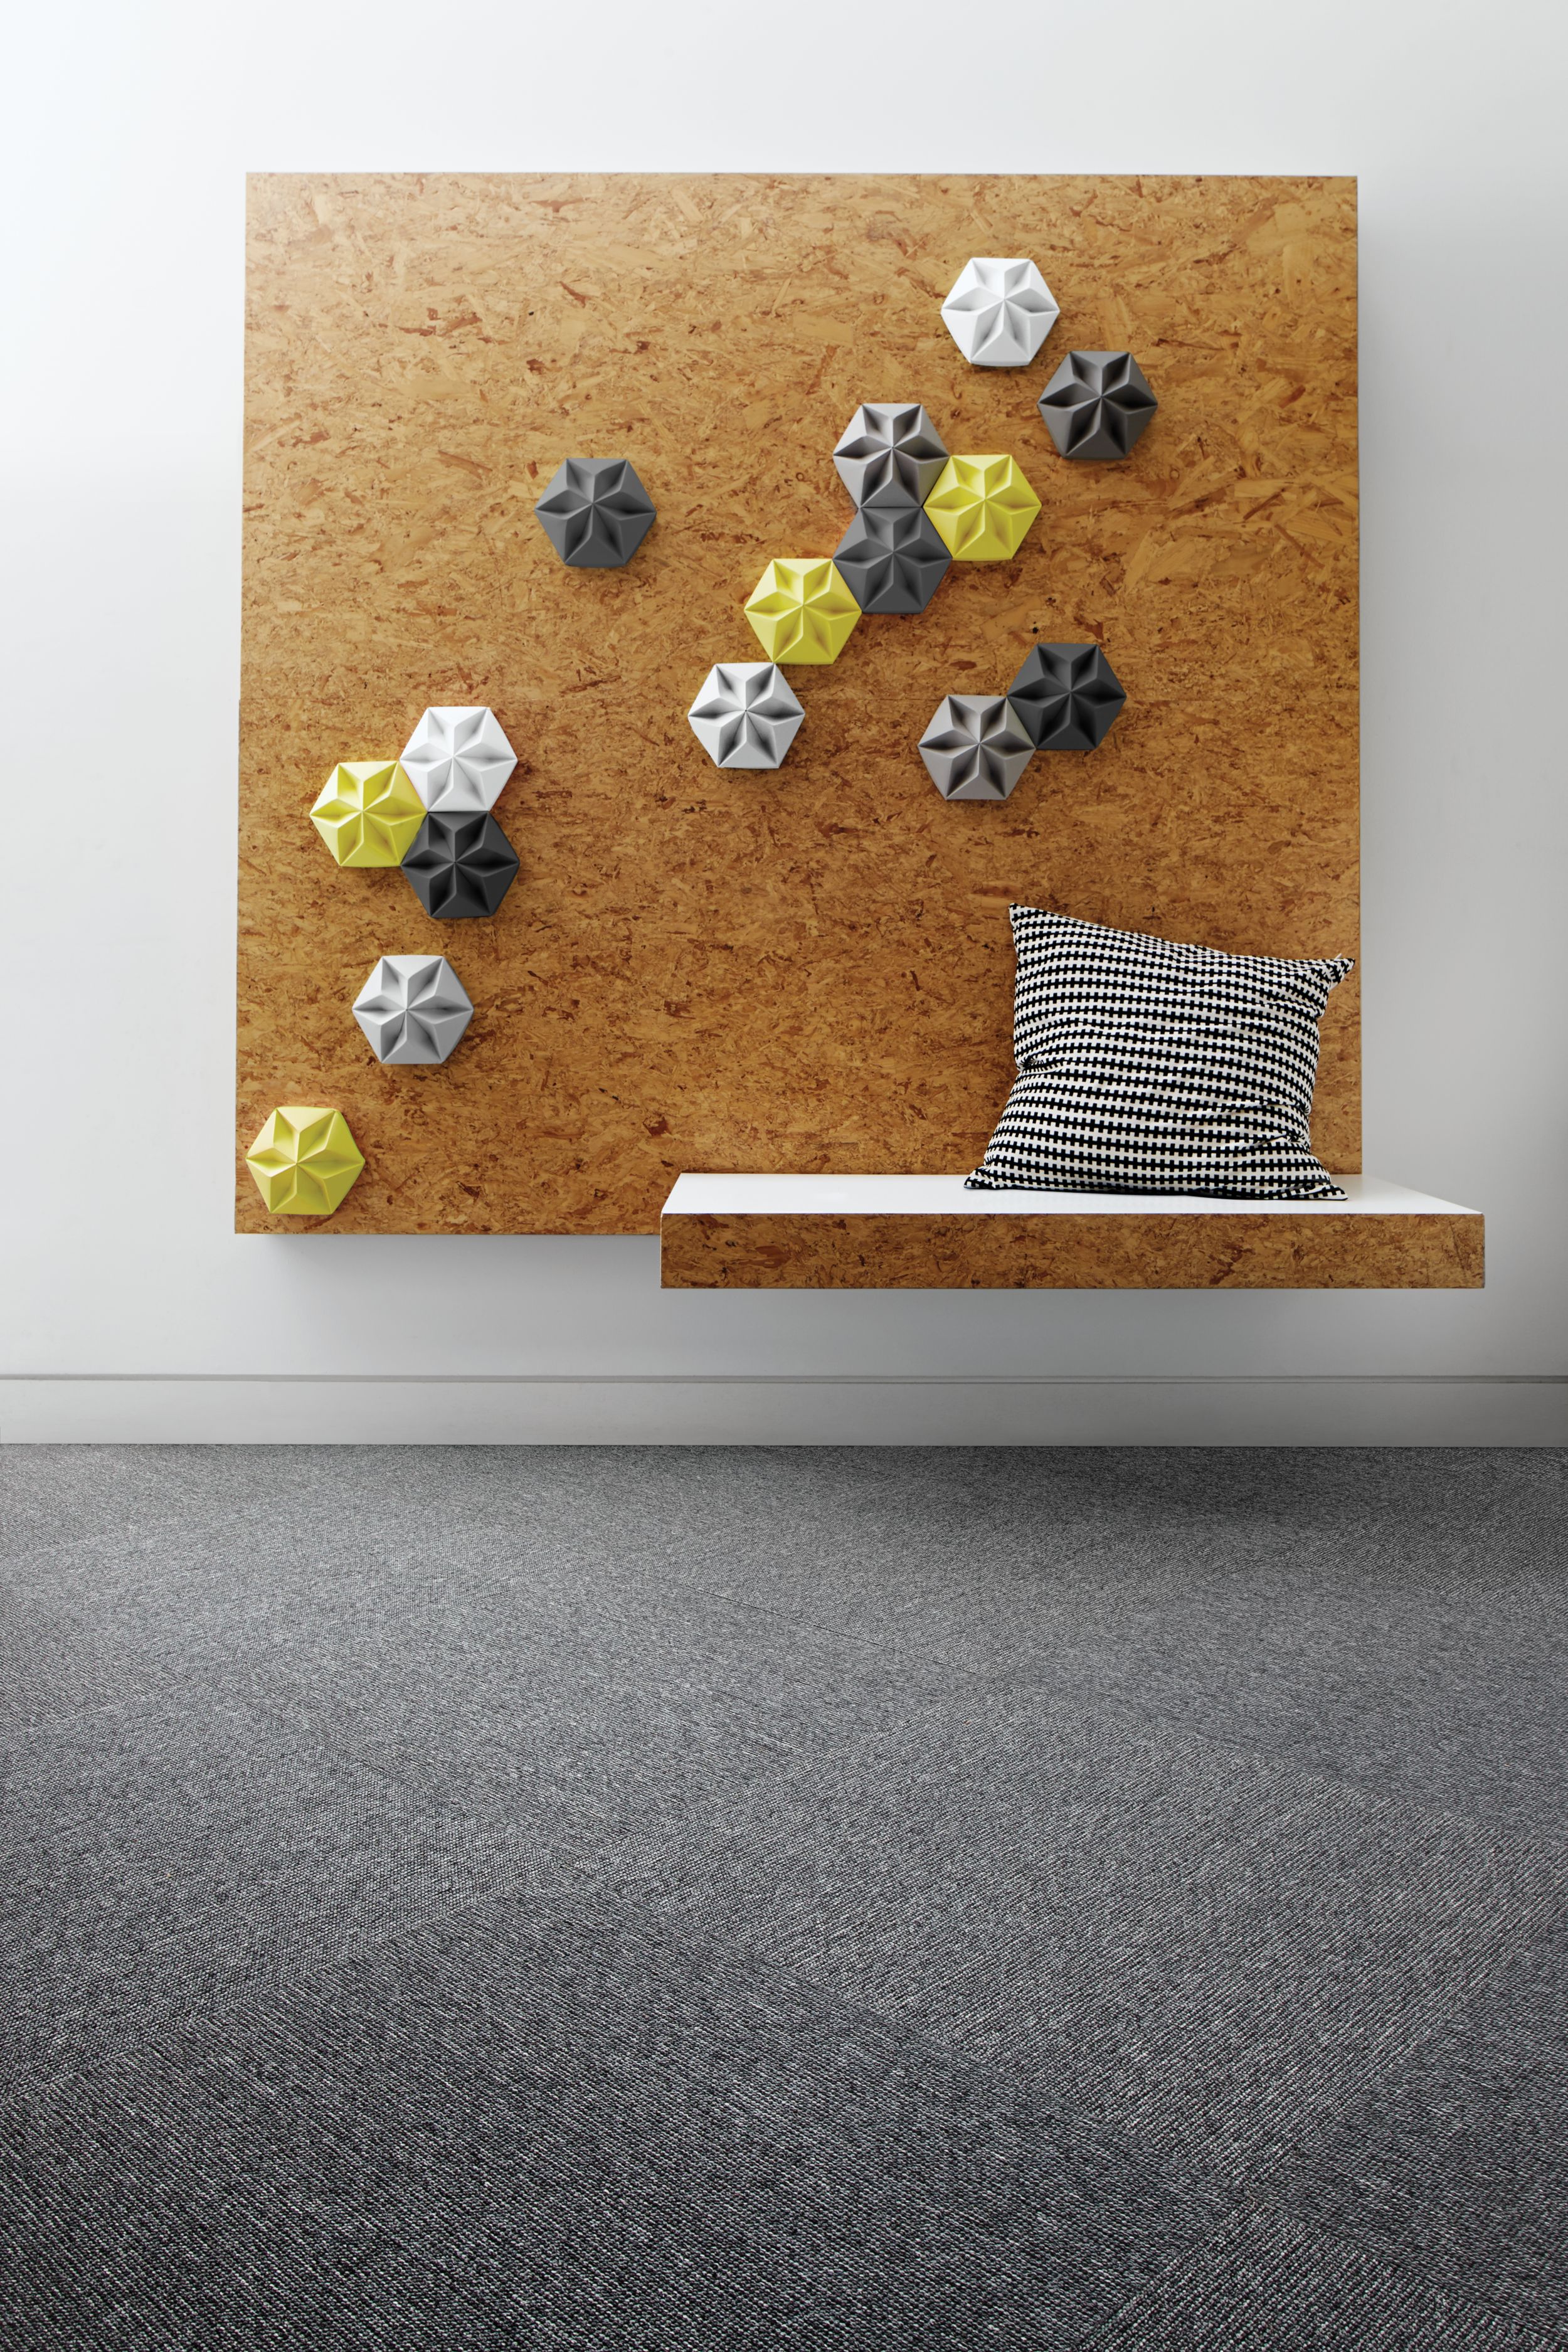  Interface Scandinavian carpet tile in room with suspended shelf and art installation imagen número 1